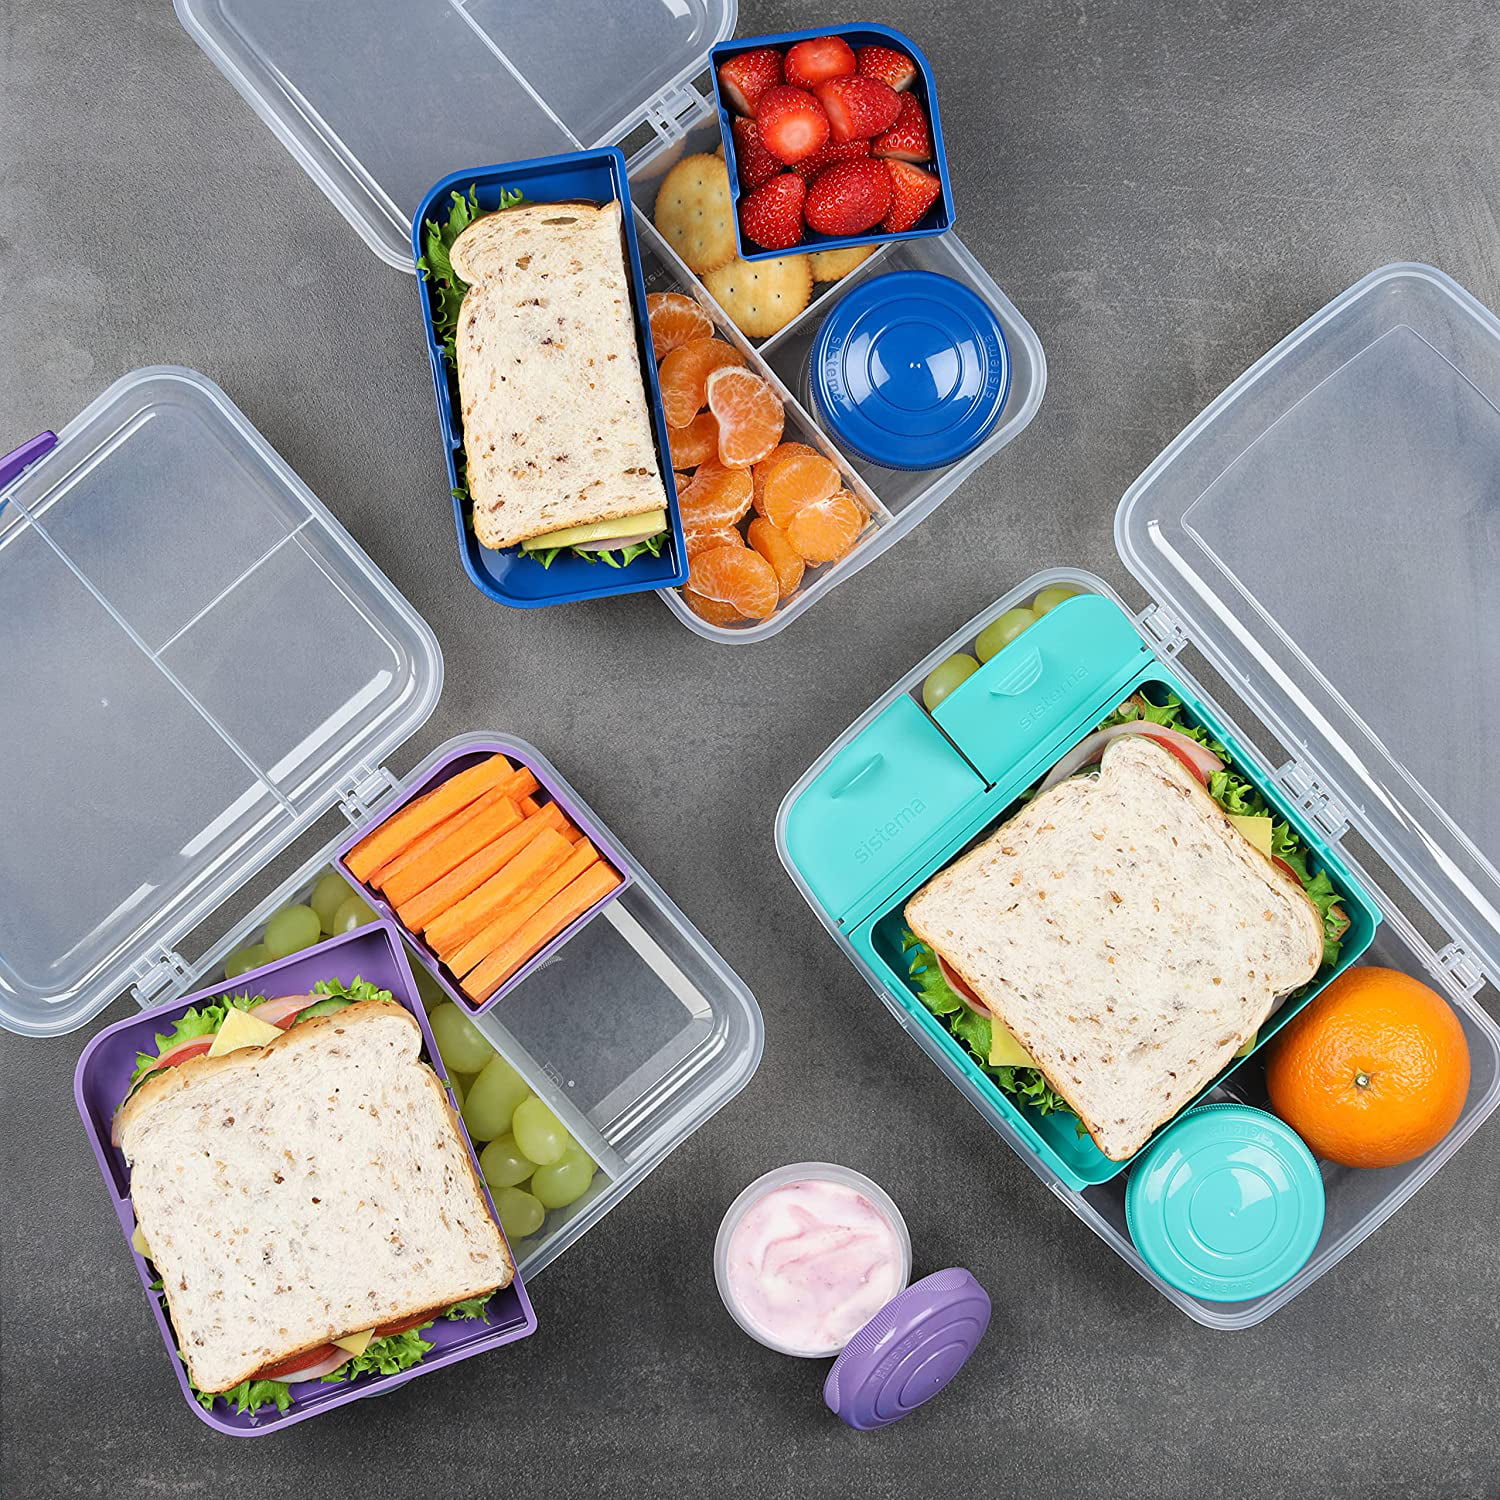 Sistema Bento Box Adult Lunch Box with 2 Compartments, Sandwhich,Salad  Dressing Container,Dishwasher Safe,Color May Vary